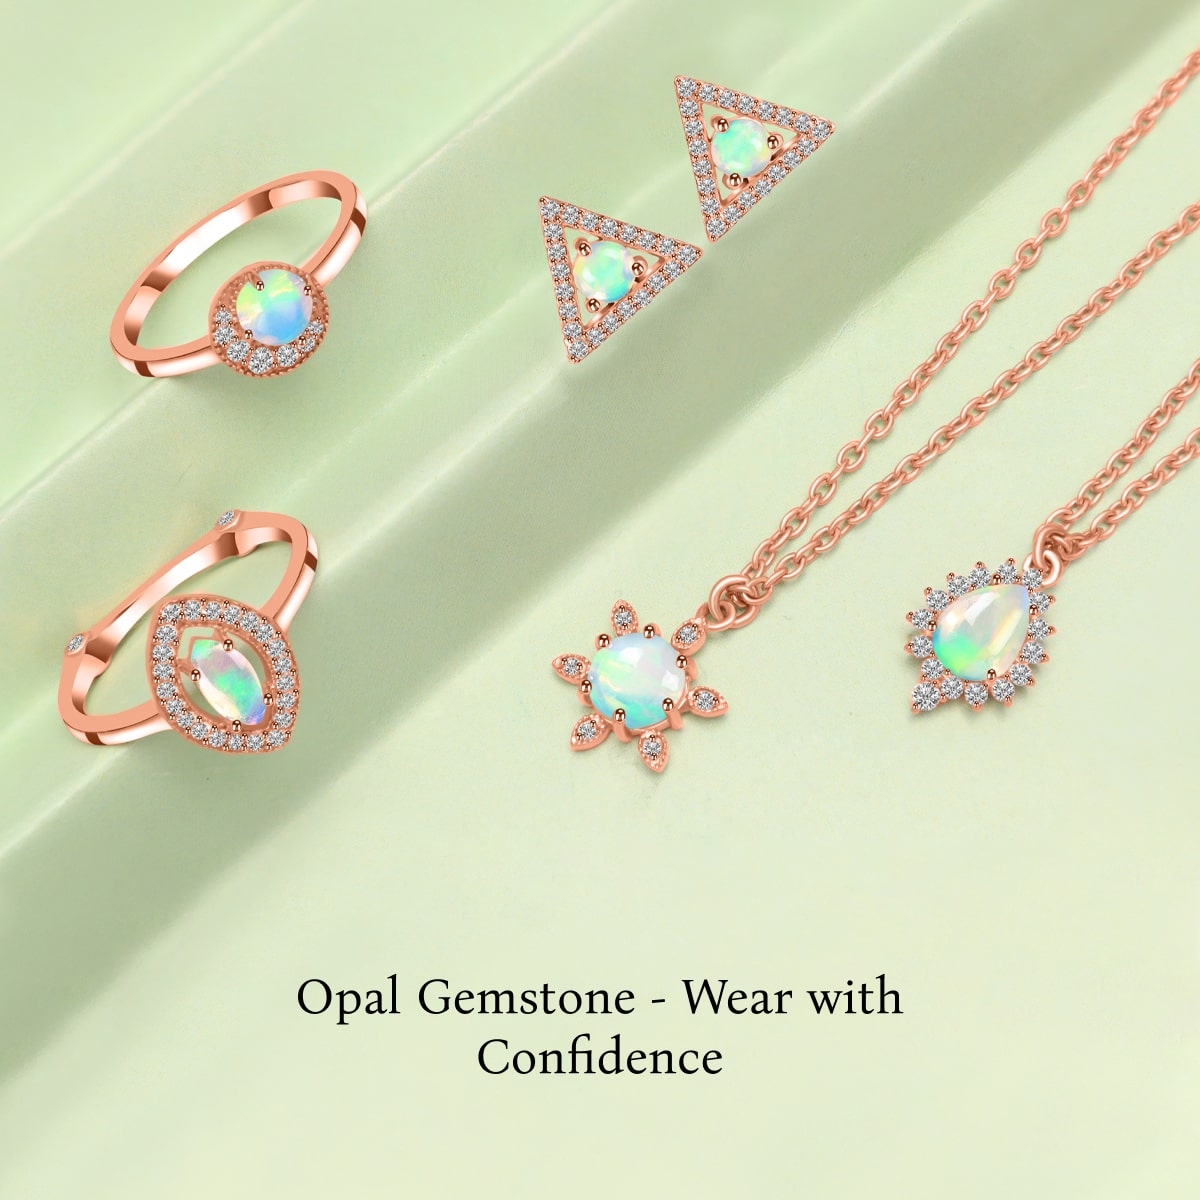 How to Wear and Choose Opal Gemstone